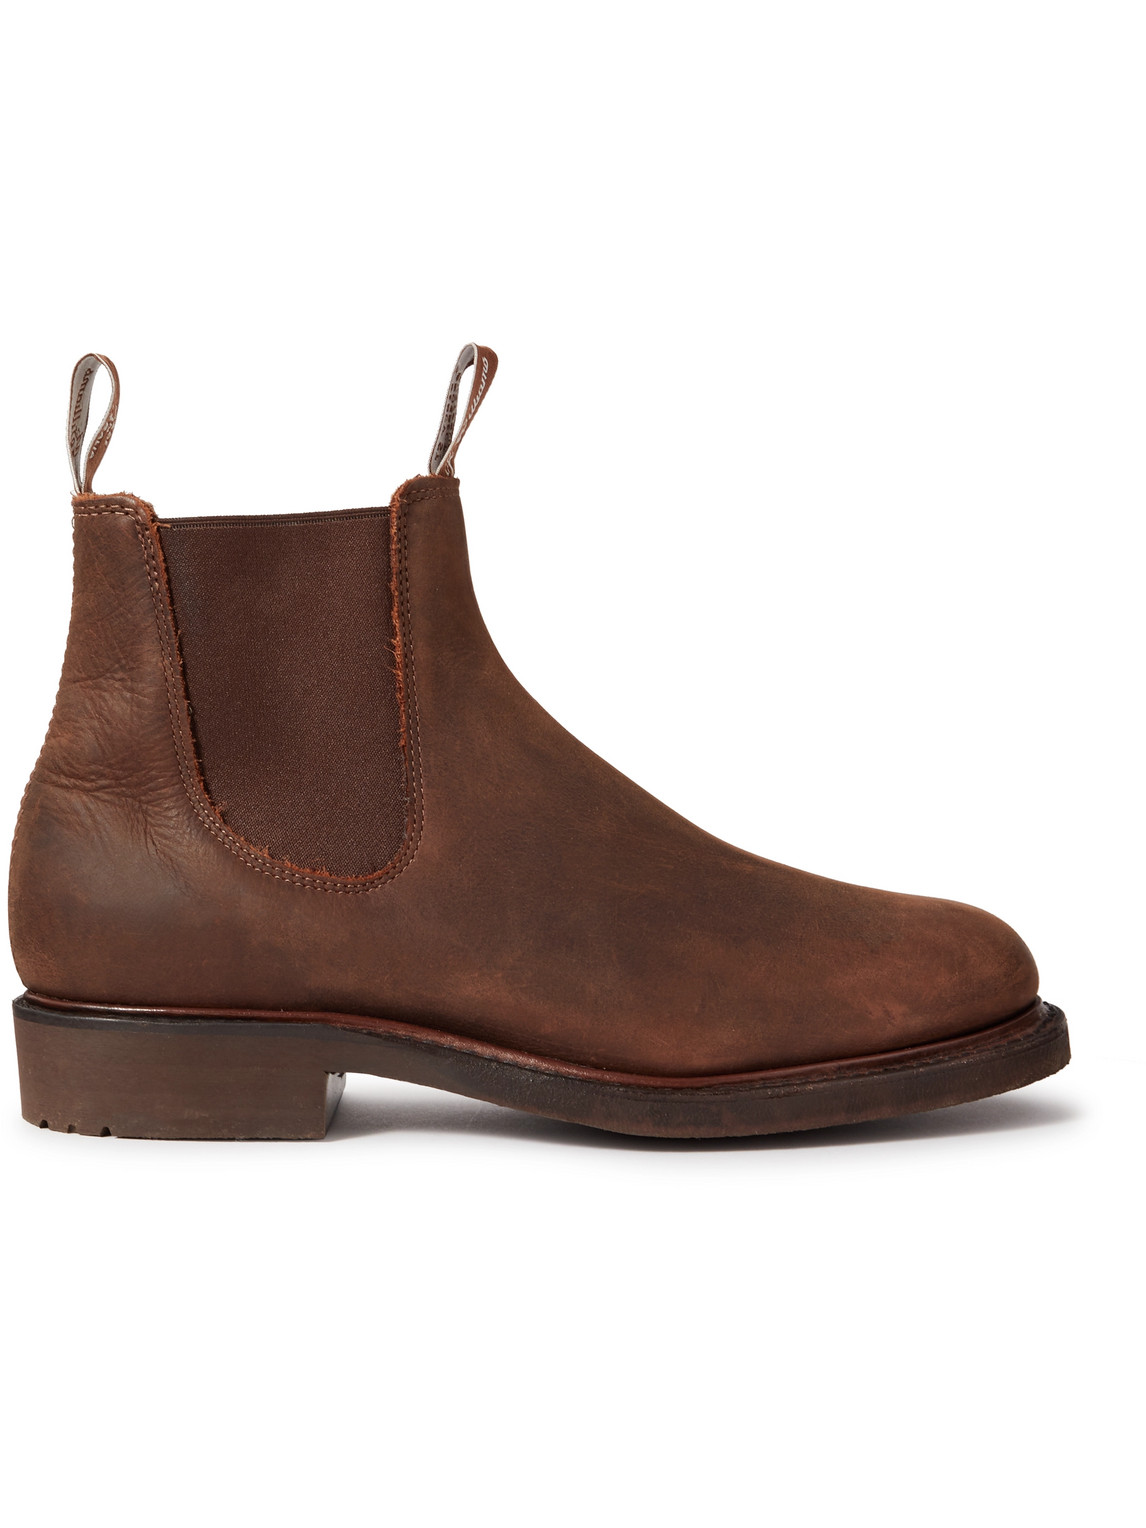 R.M.Williams Comfort Goodwood Leather Chelsea Boots